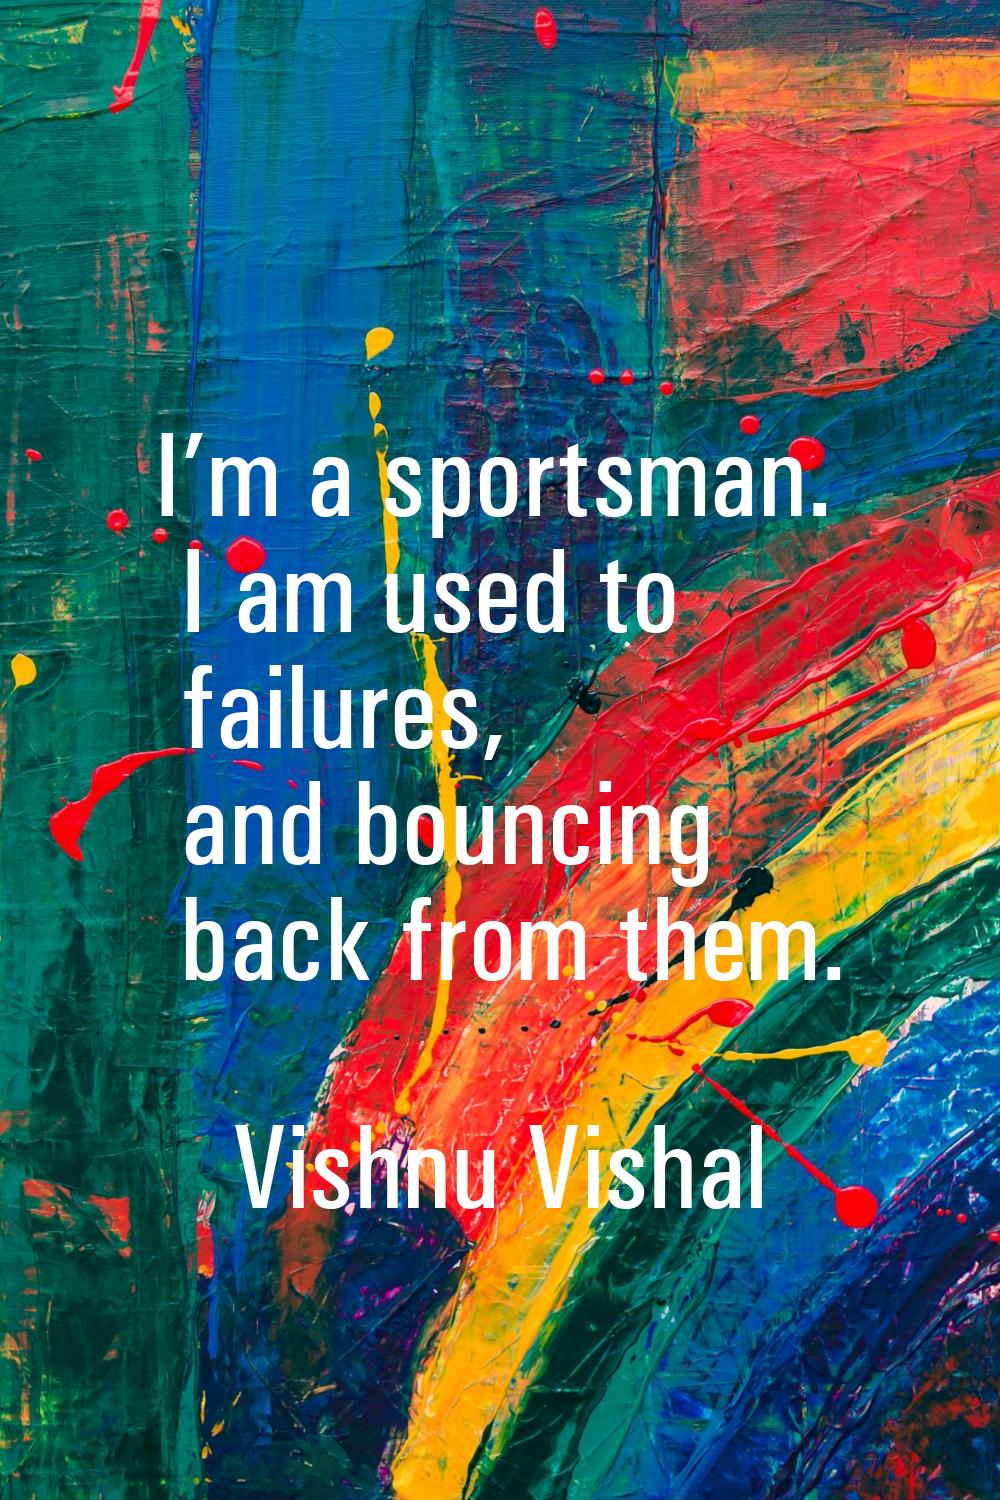 I’m a sportsman. I am used to failures, and bouncing back from them.